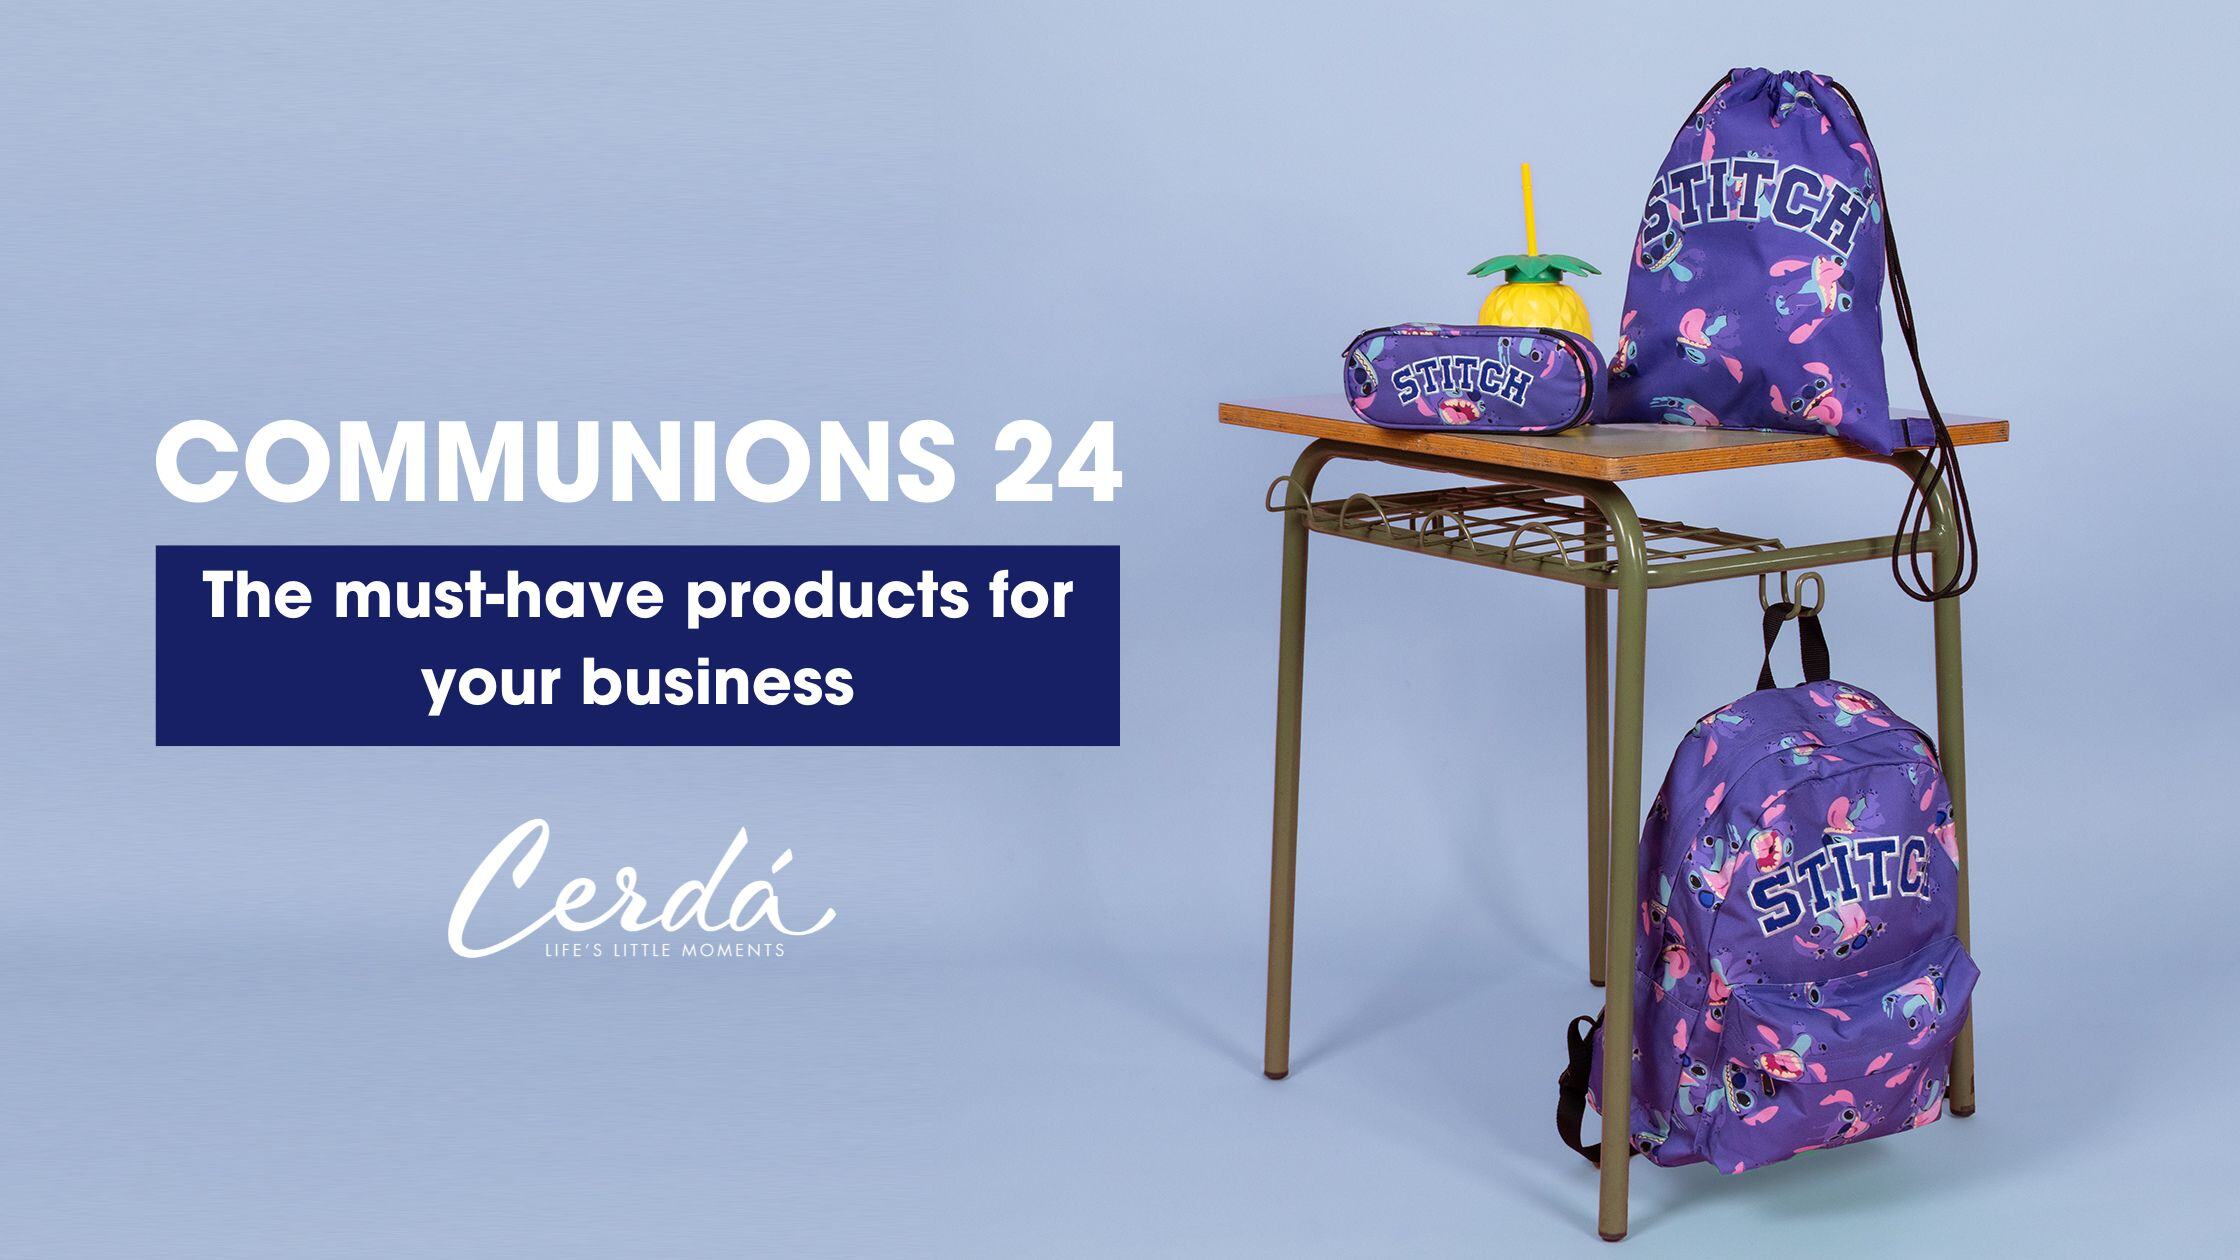 Discover the products that can not miss in your point of sale these communions.